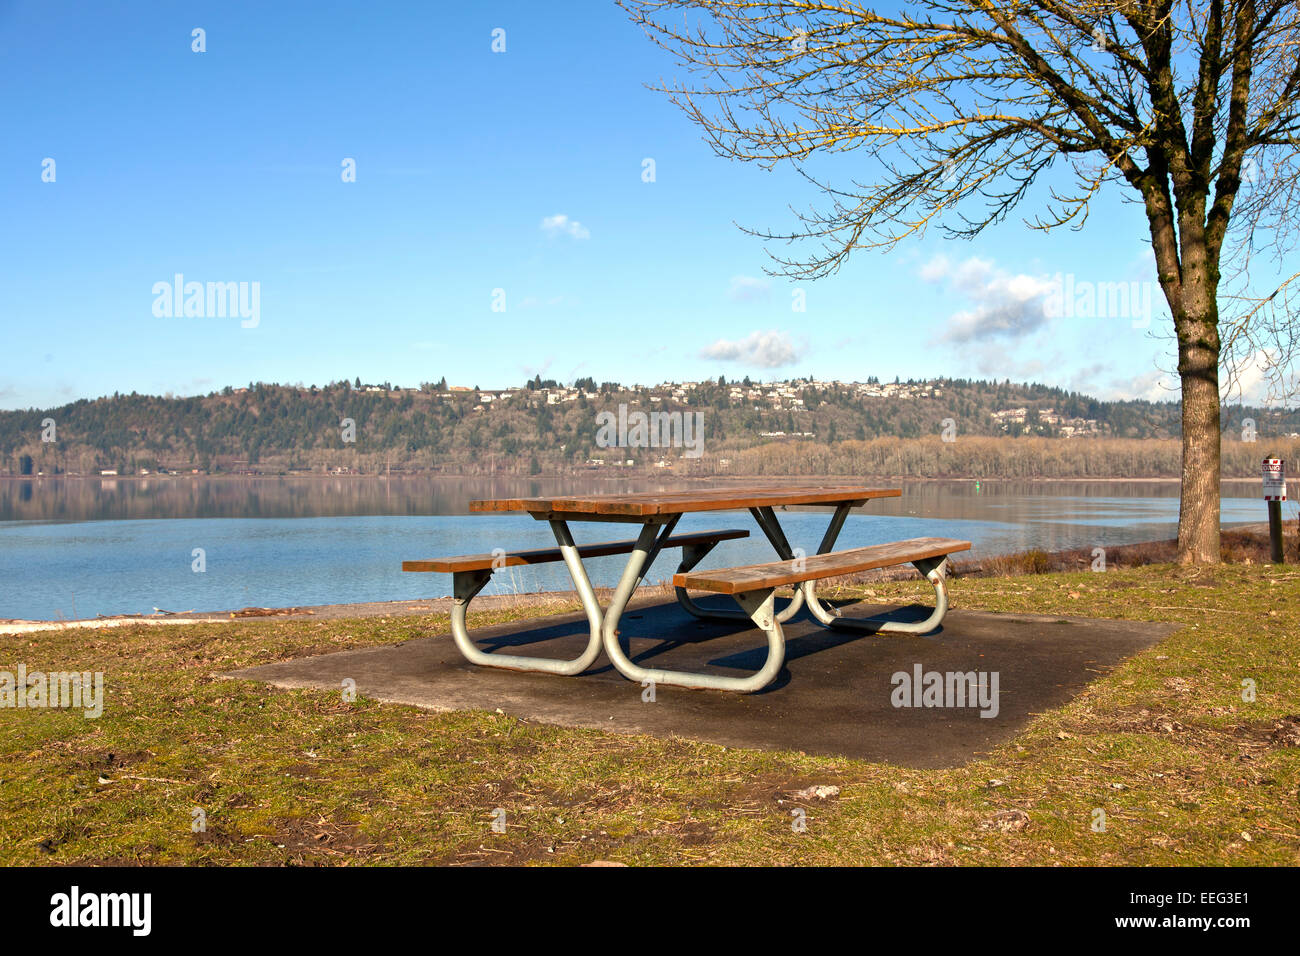 Picnic bench with a view Columbia river Oregon parks. Stock Photo